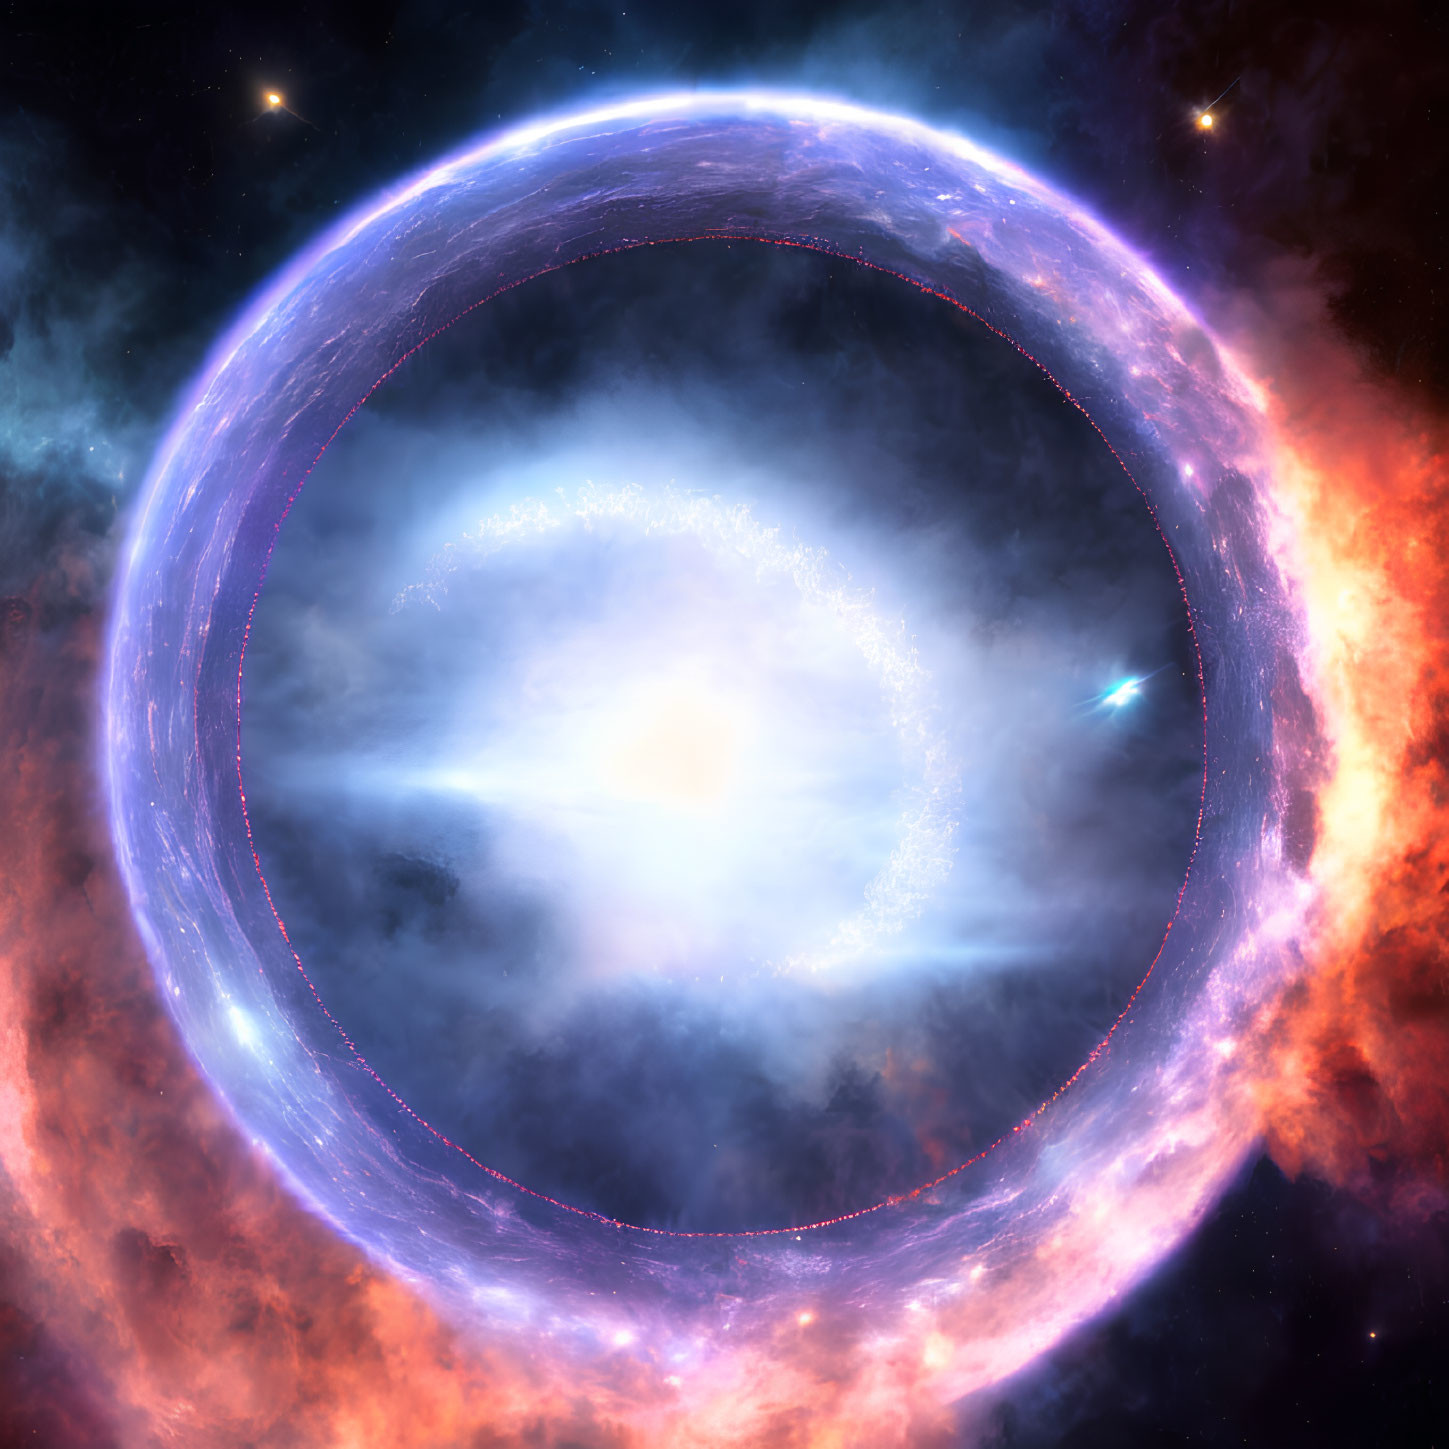 Colorful cosmic scene with glowing ring nebula and celestial core.